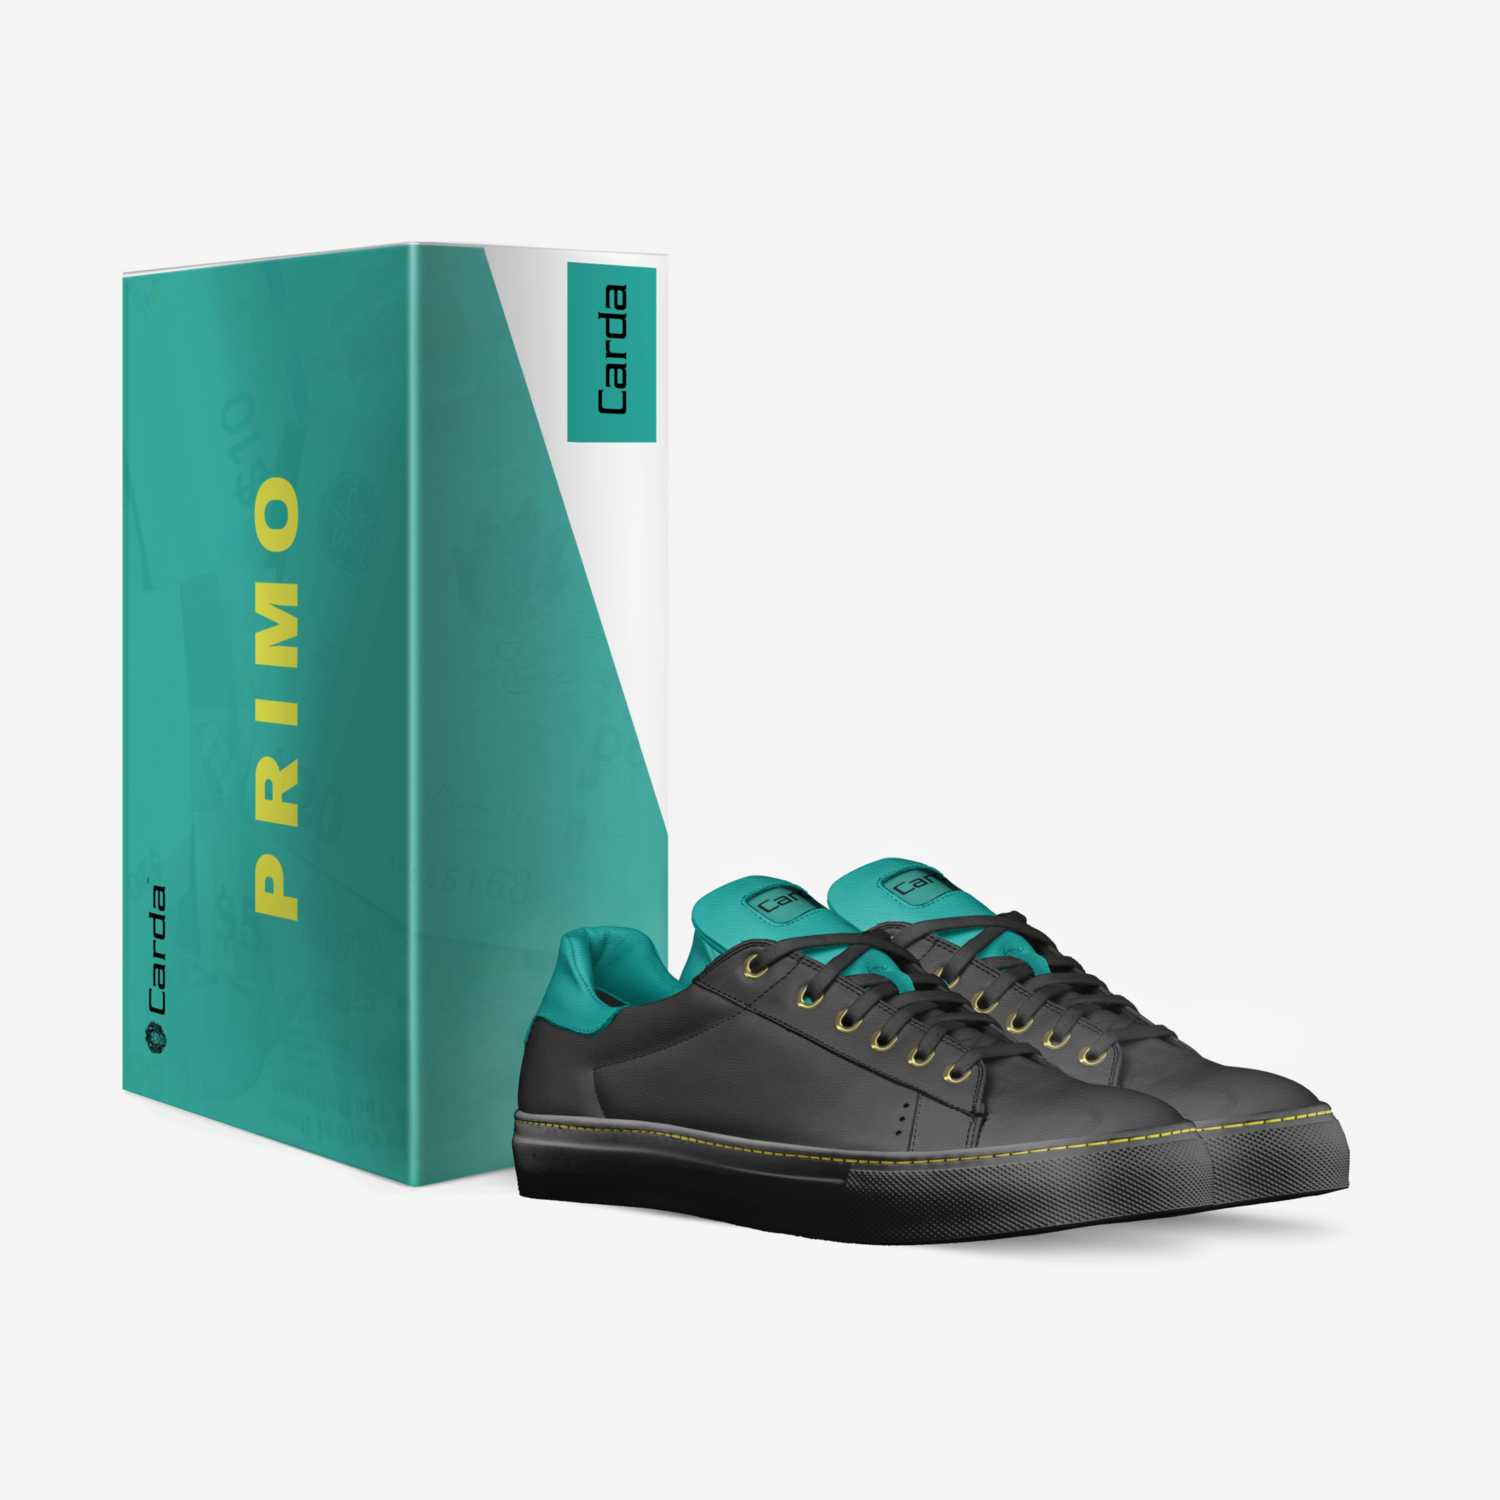 Primo custom made in Italy shoes by Dane Strachan | Box view